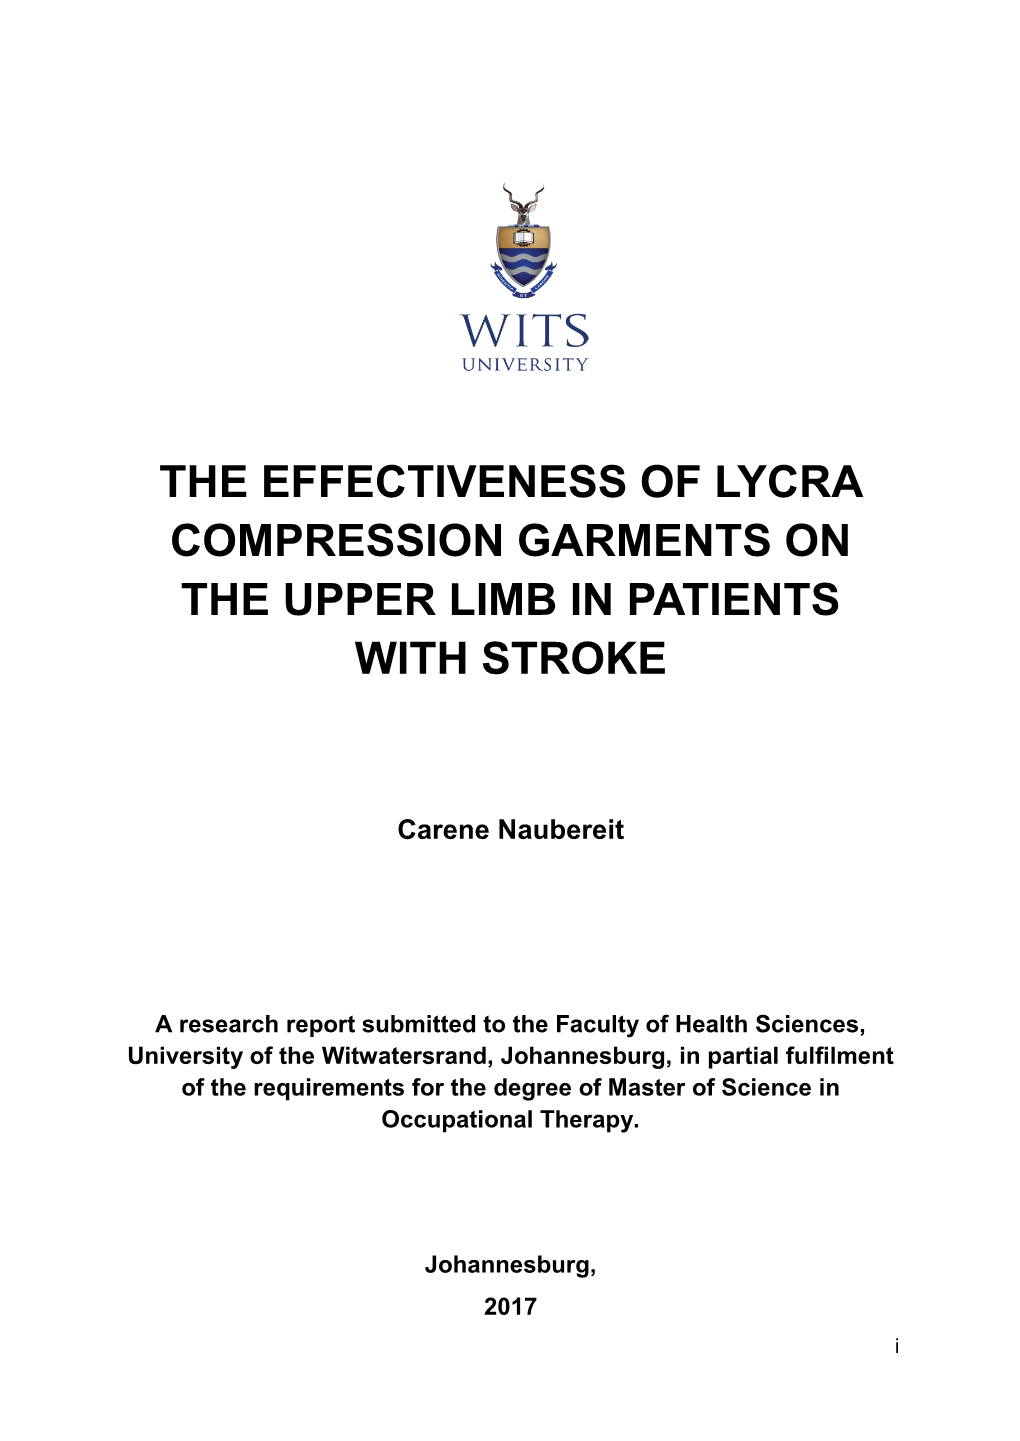 The Effectiveness of Lycra Compression Garments on the Upper Limb in Patients with Stroke